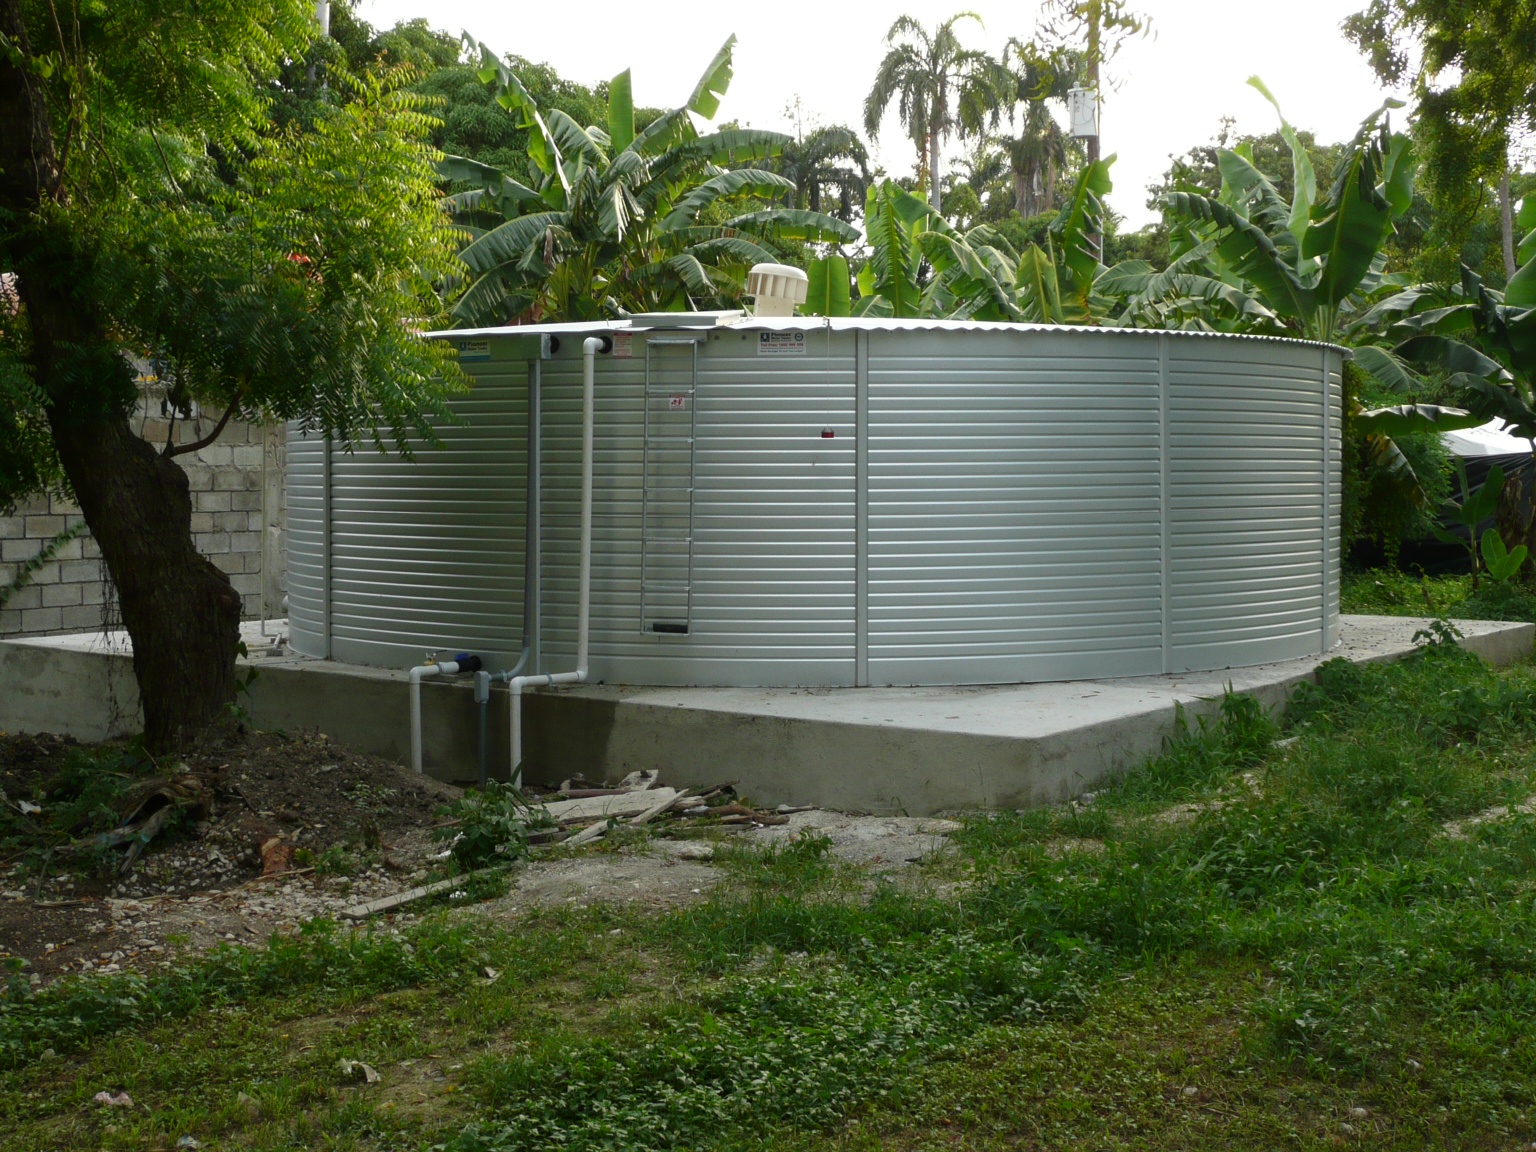  ​50,000 Gallon Storage tank for treated, pure water at&nbsp;Hopital Adventiste d'Haiti in Port-Au-Prince.    